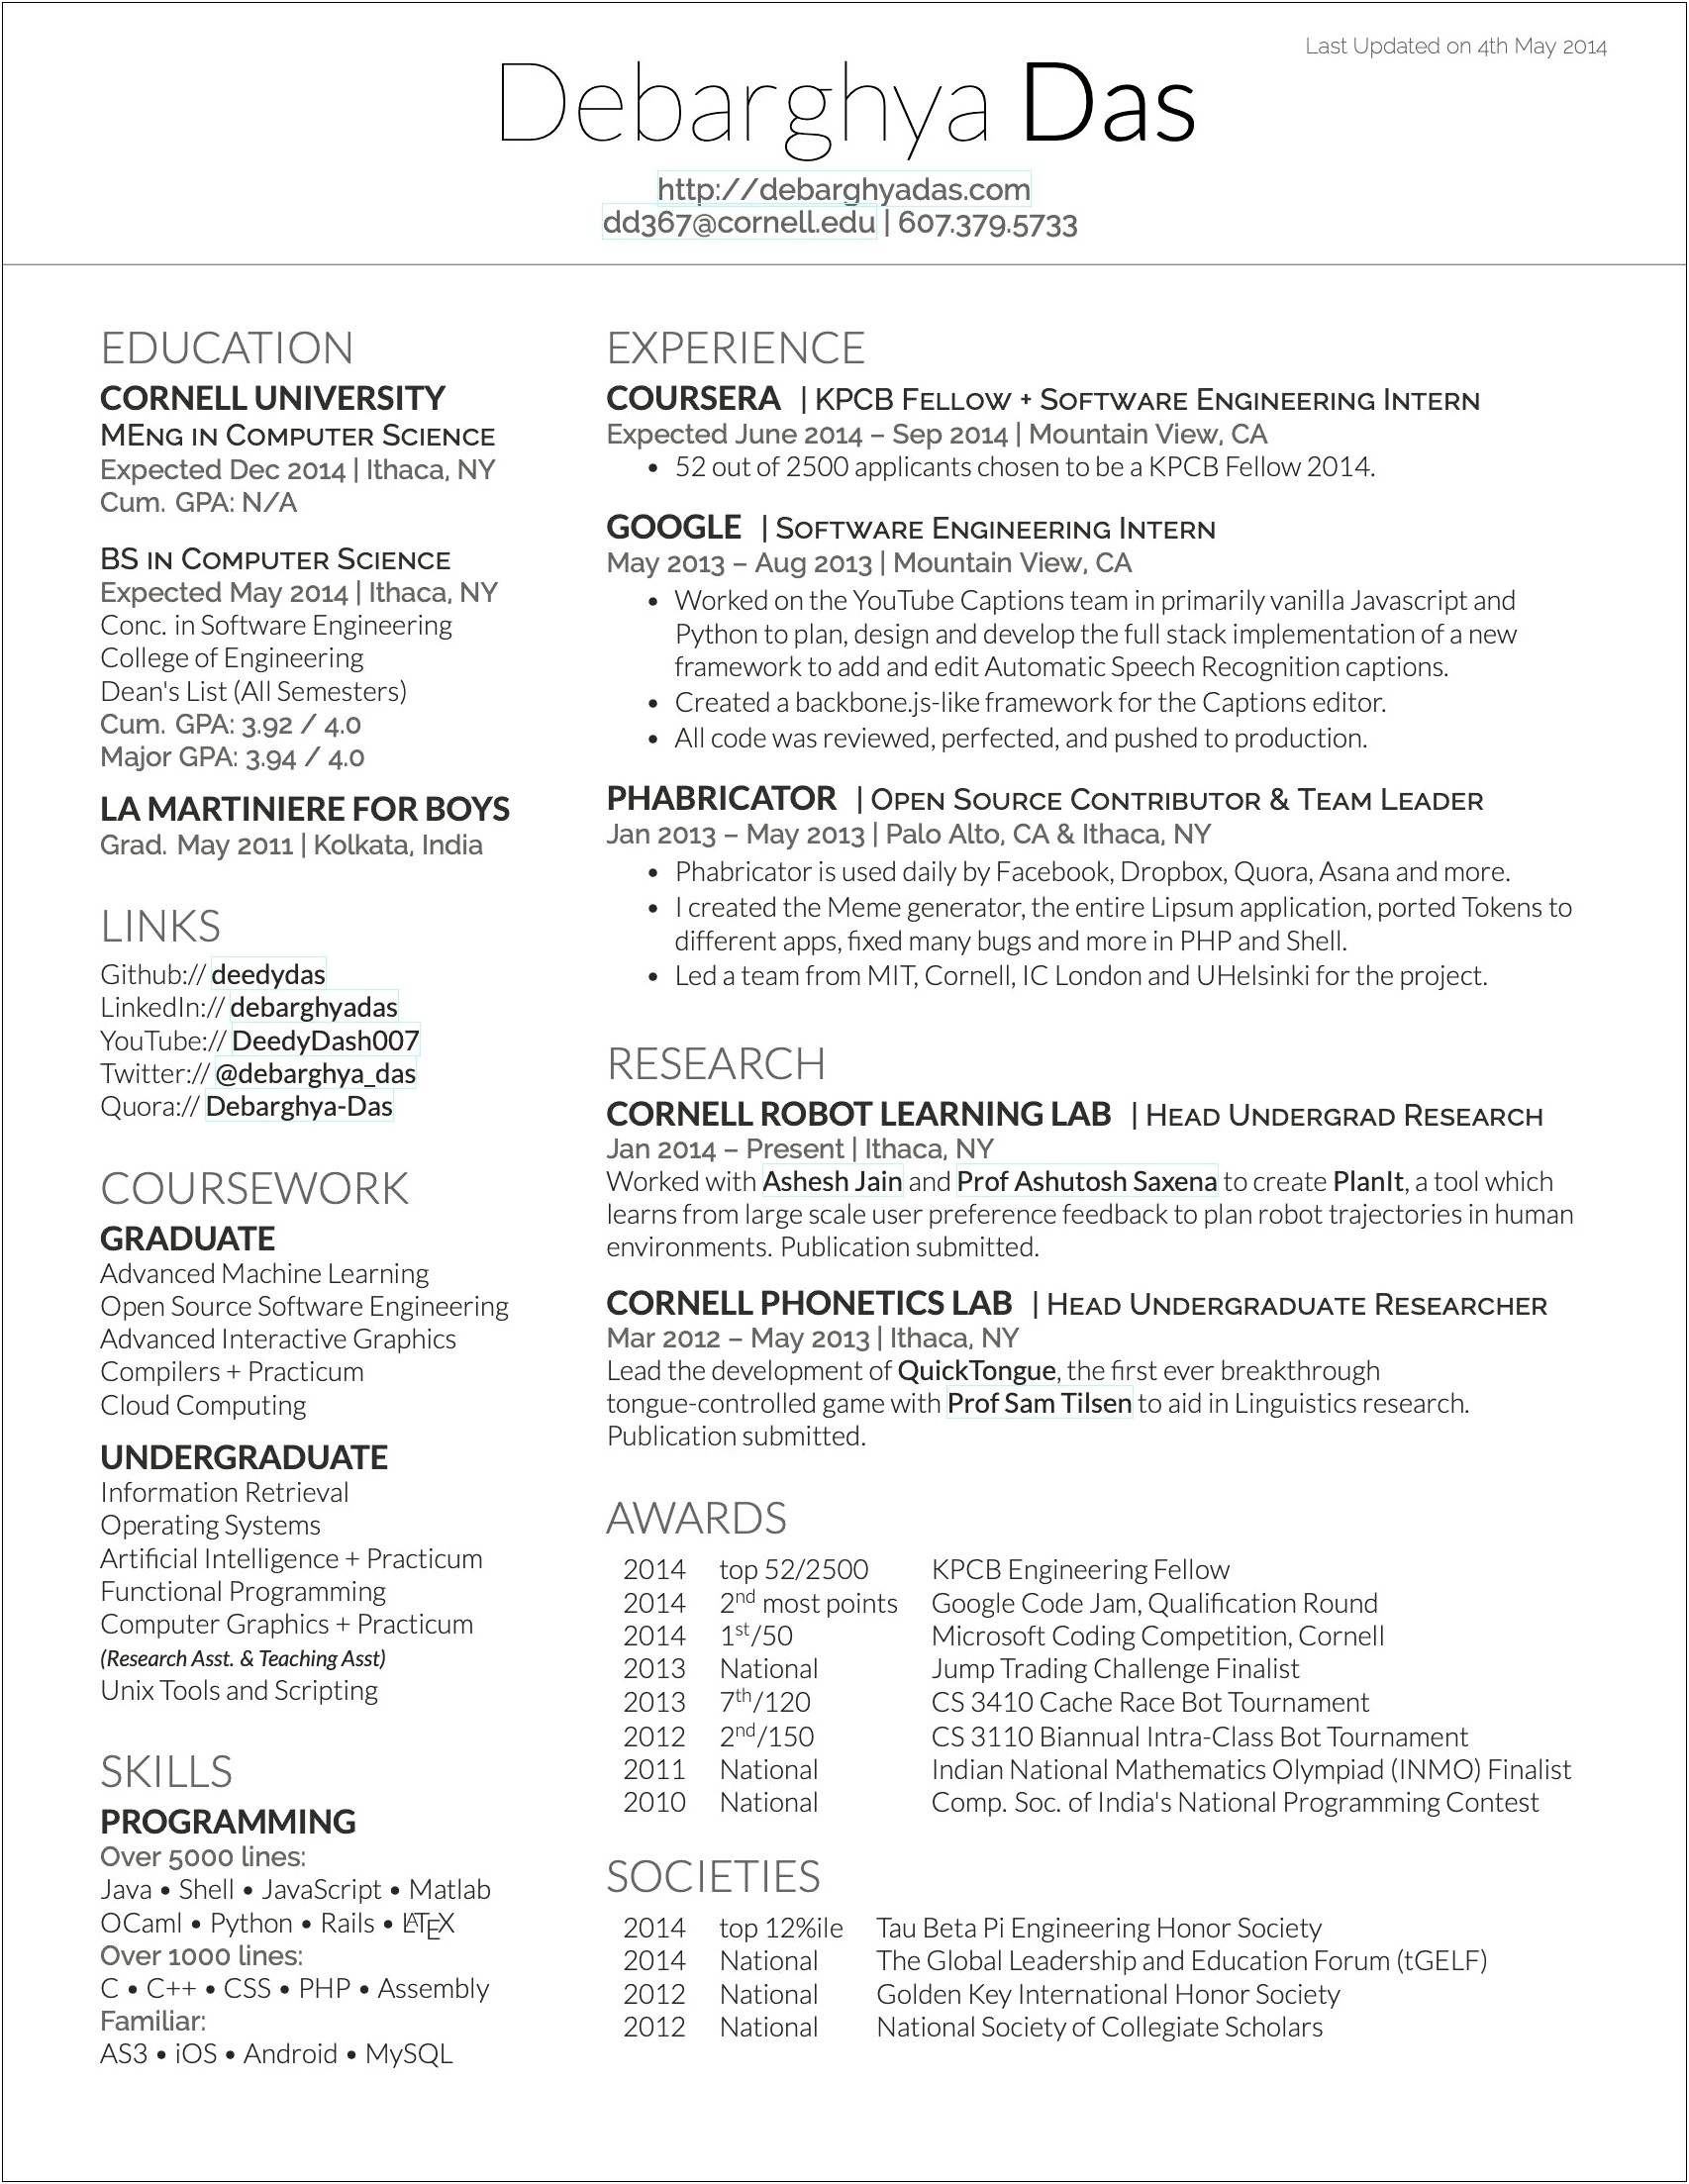 List Job Titles Seperately Or Together On Resume